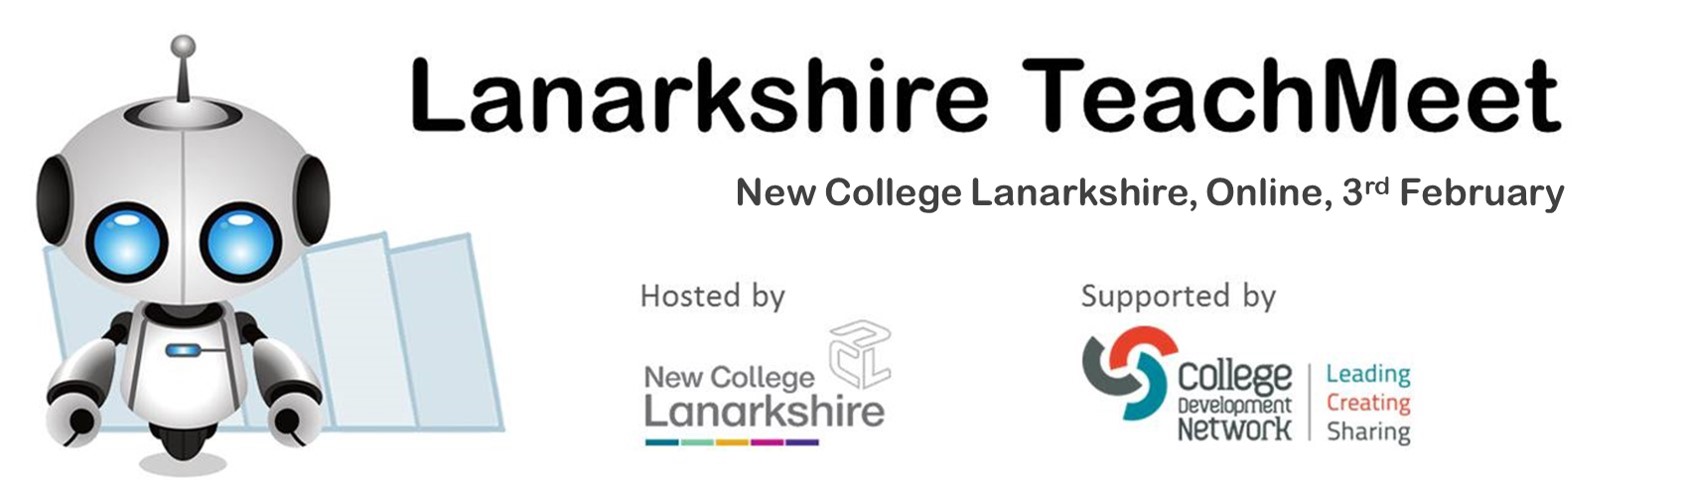 TeachMeet Lanarkshire, 3rd February, hosted by New College Lanarkshire and supported by College Development Network